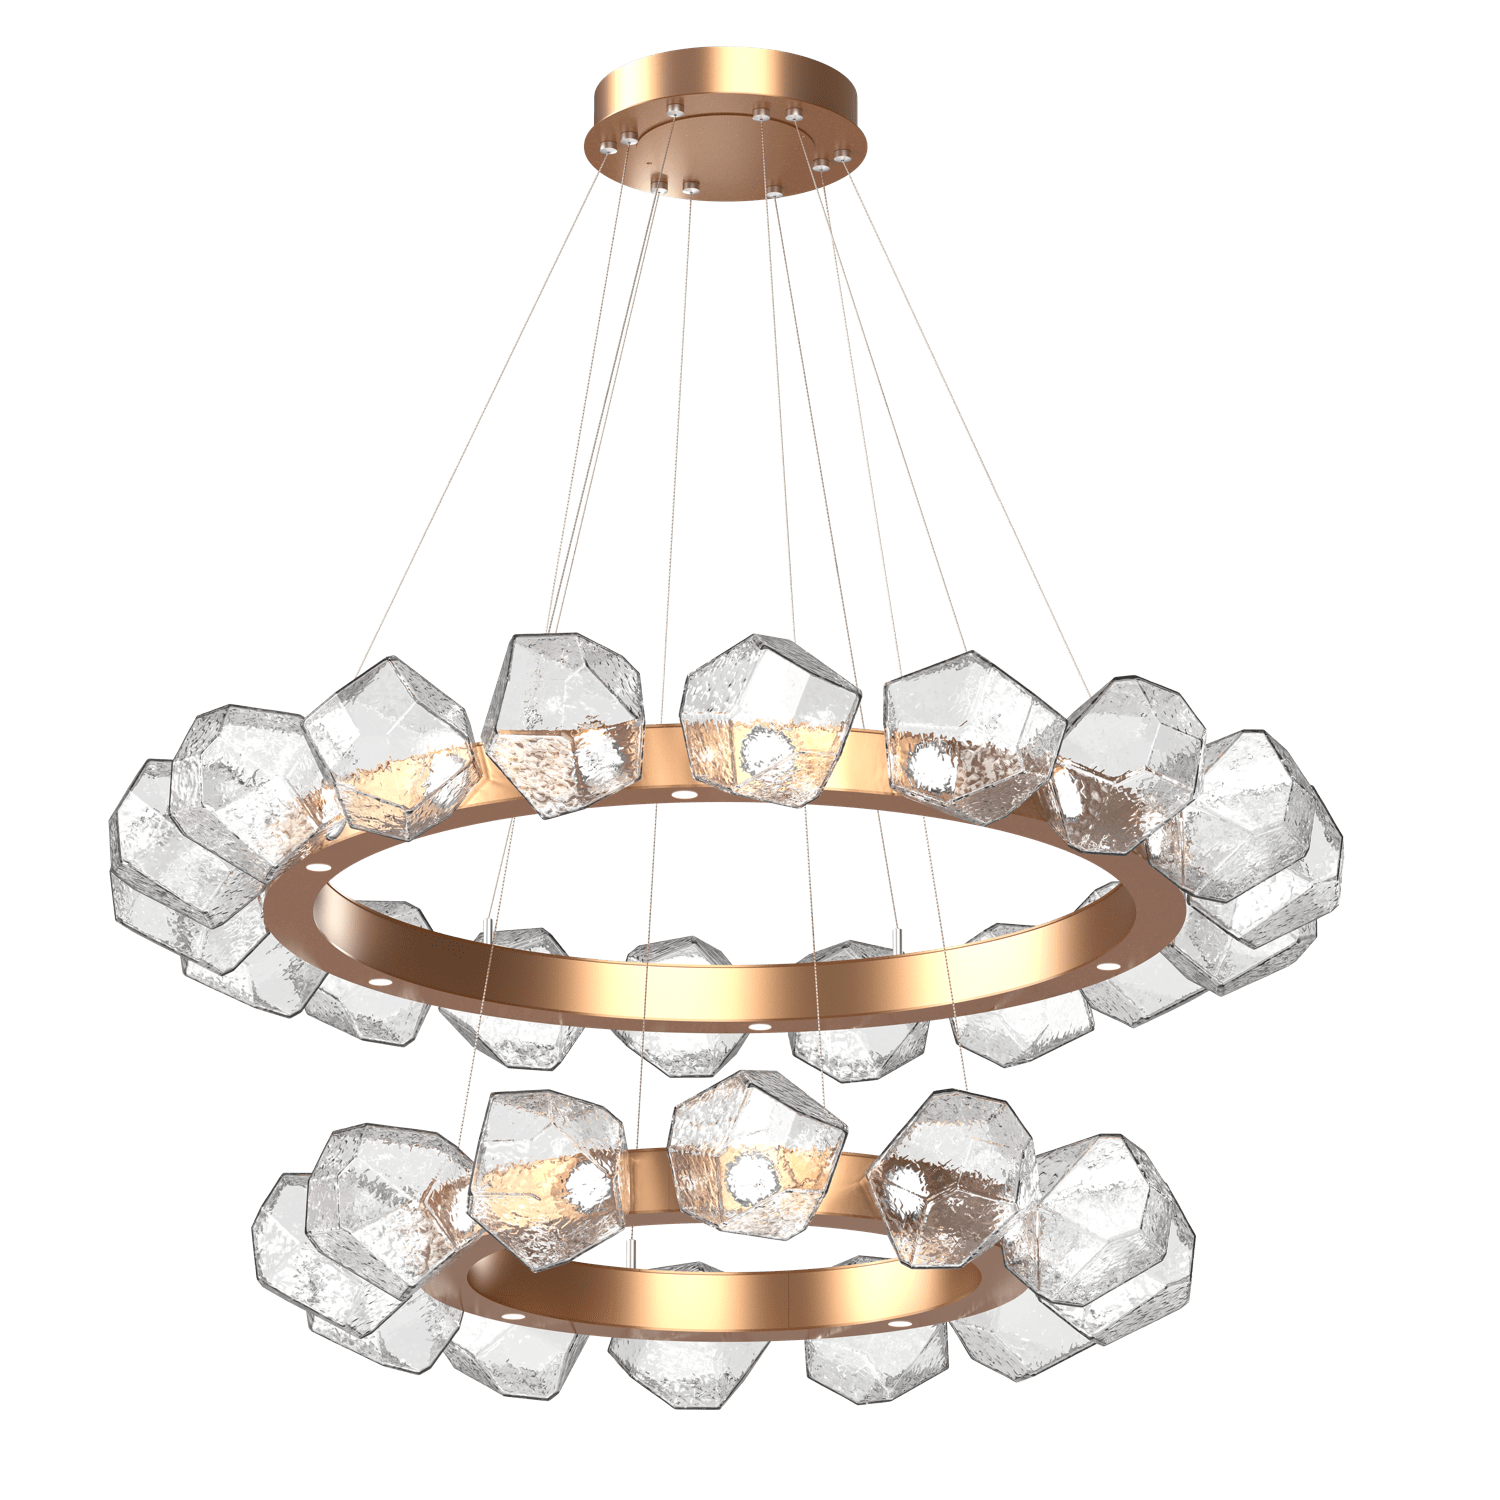 CHB0039-2T-NB-C-Hammerton-Studio-Gem-48-inch-two-tier-radial-ring-chandelier-with-novel-brass-finish-and-clear-blown-glass-shades-and-LED-lamping